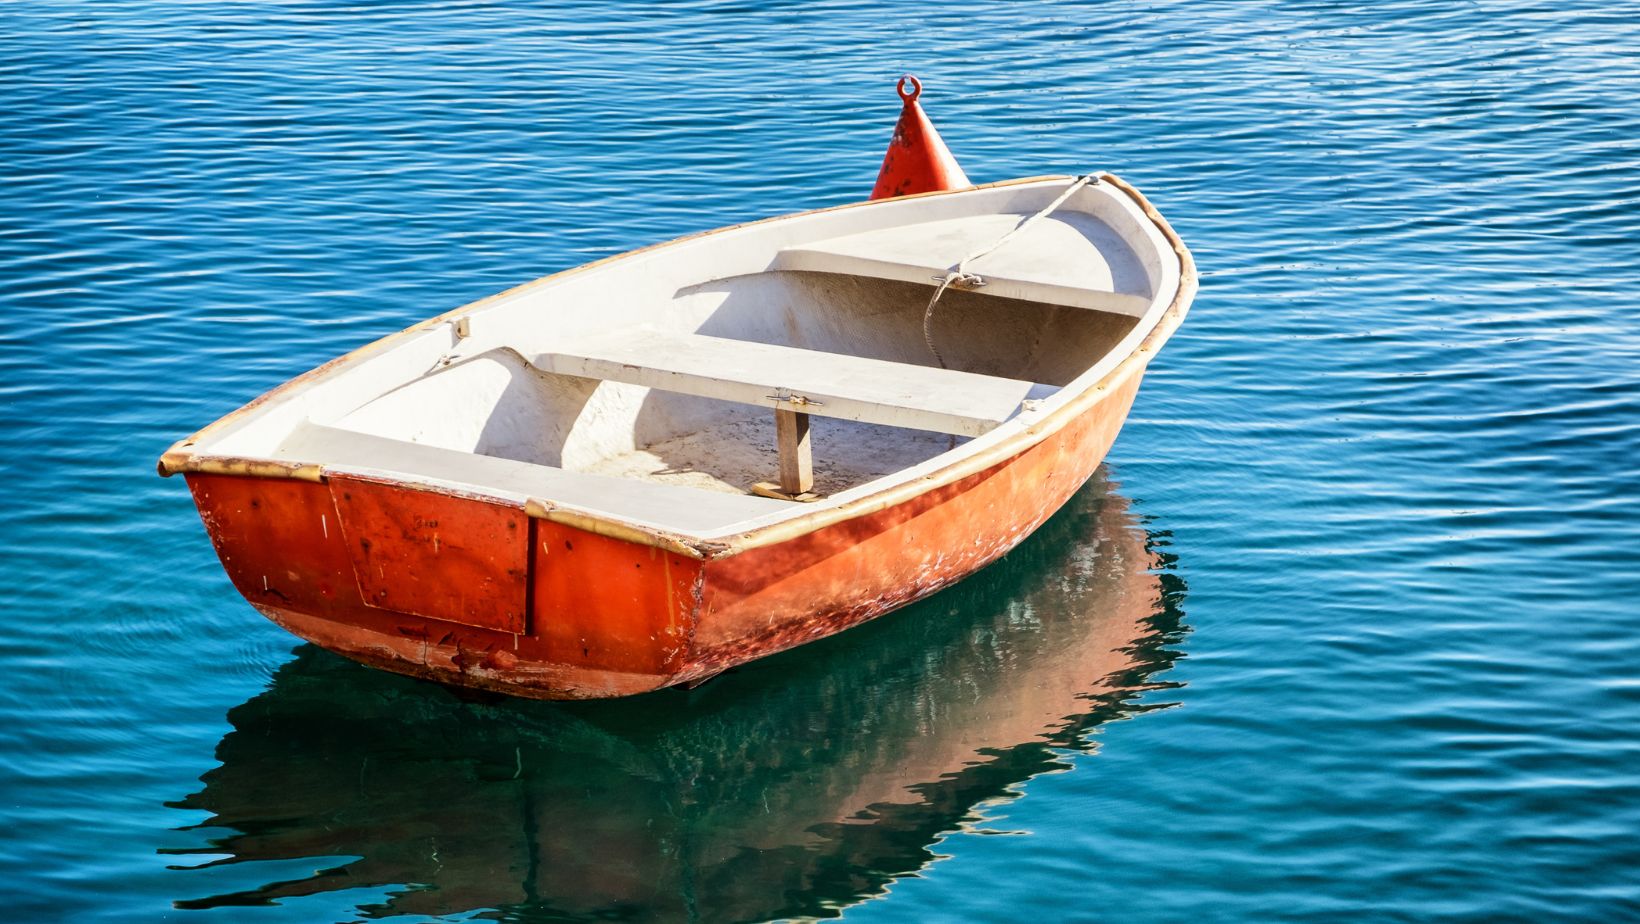 which of the following is a characteristic of an overloaded boat?